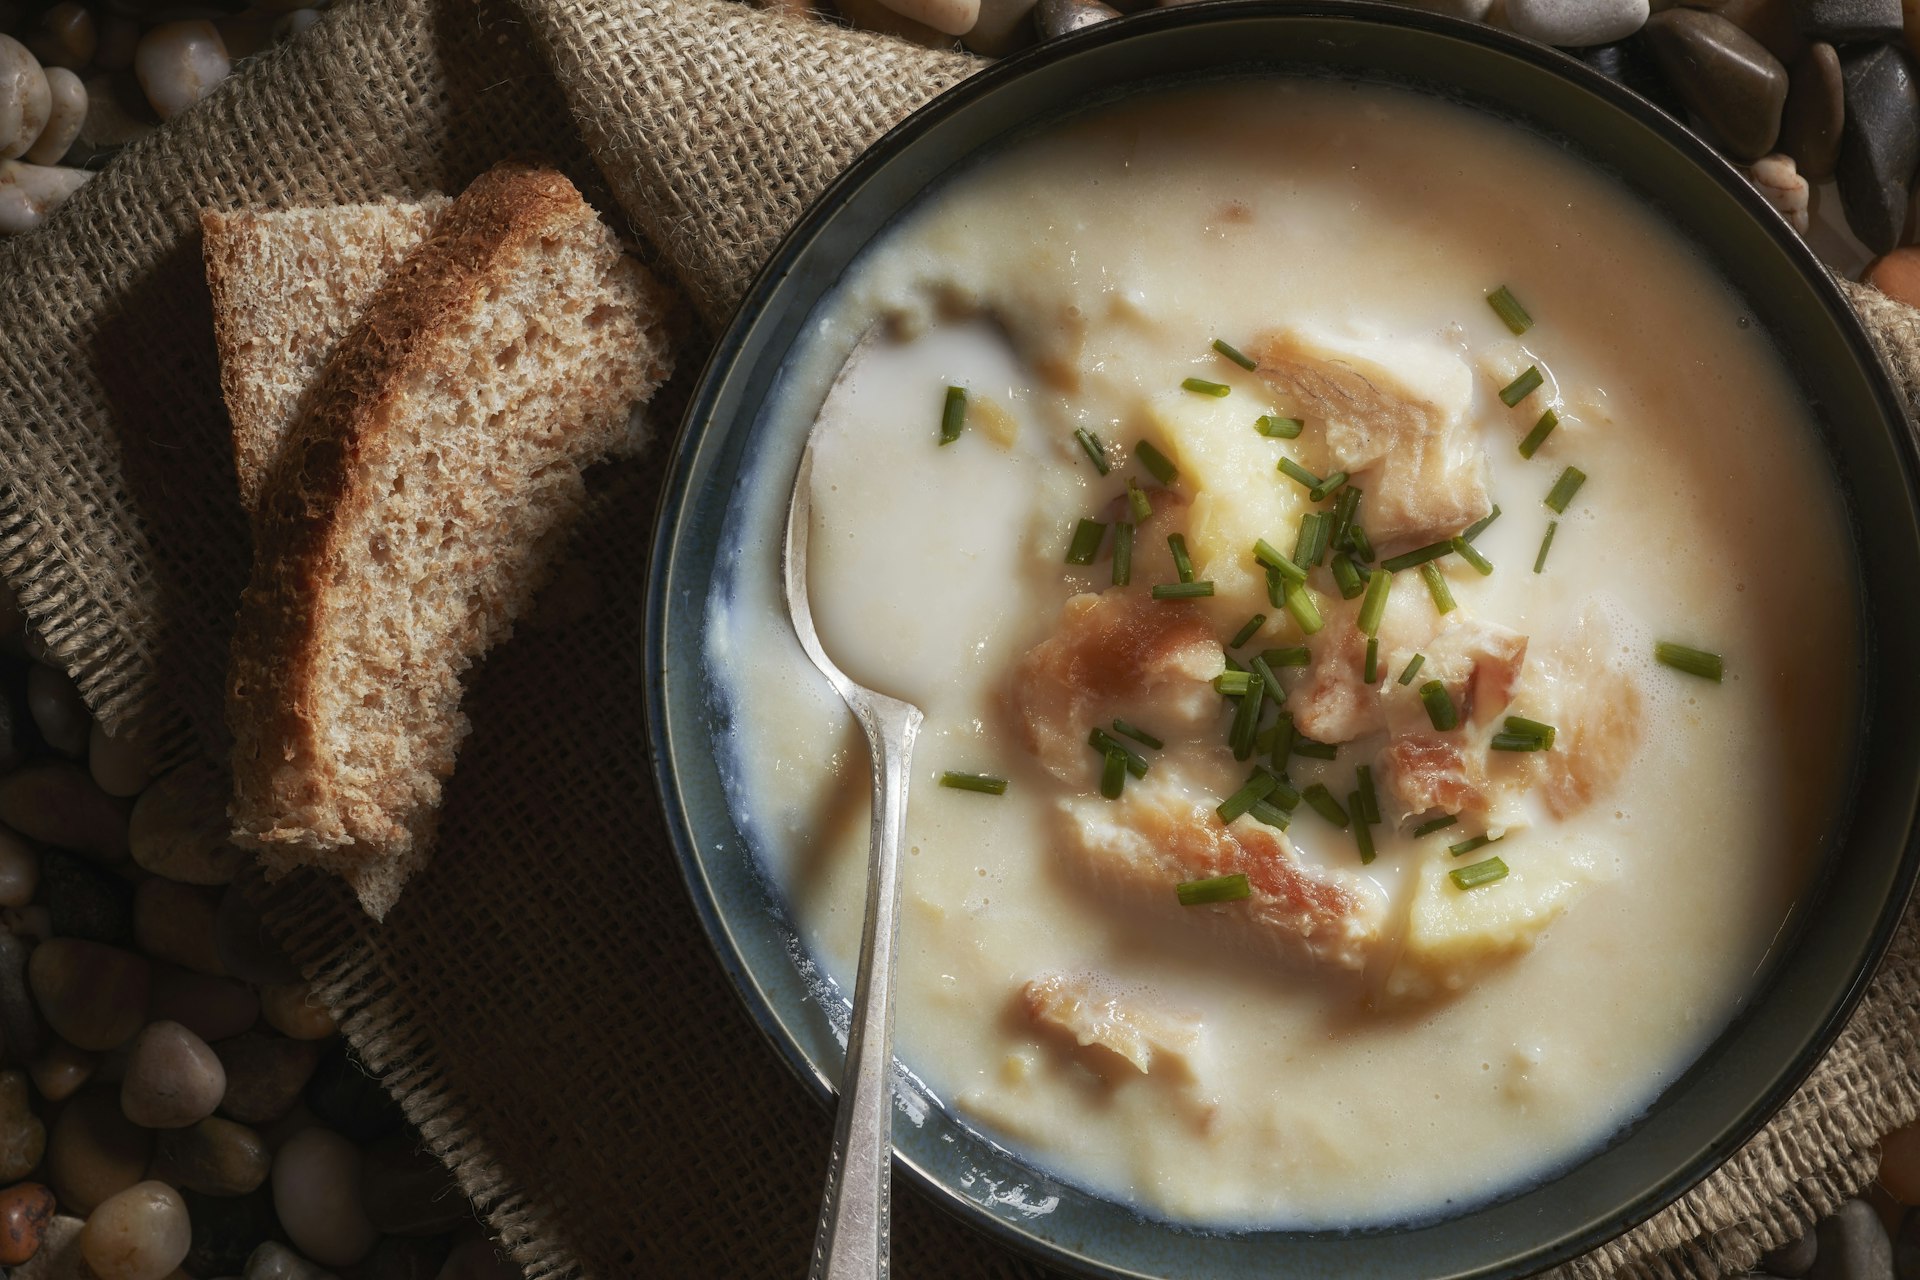 Scottish traditional soup known as Cullen Skink containing undyed smoked haddock, potatoes and milk.